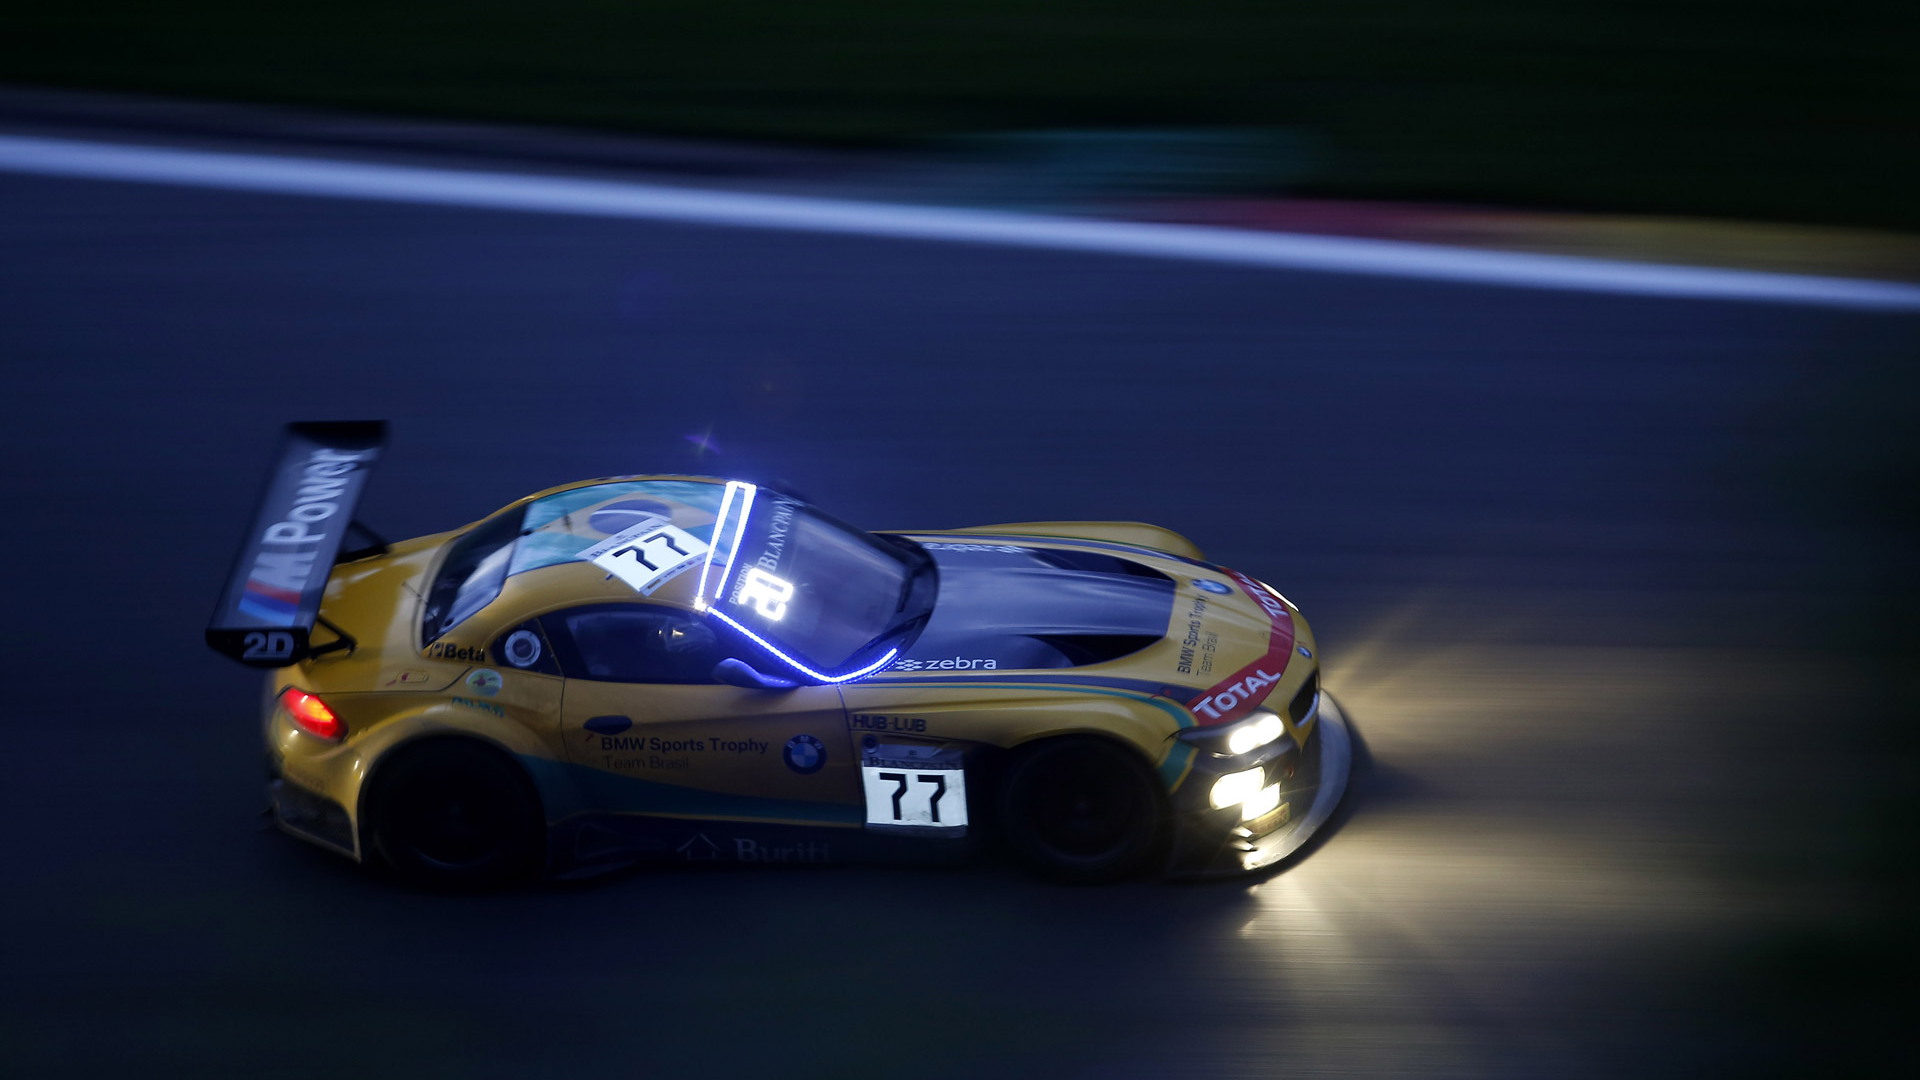 BMW Sports Trophy Team Marc VDS Z4 GT3 at the 2015 Spa 24 Hours